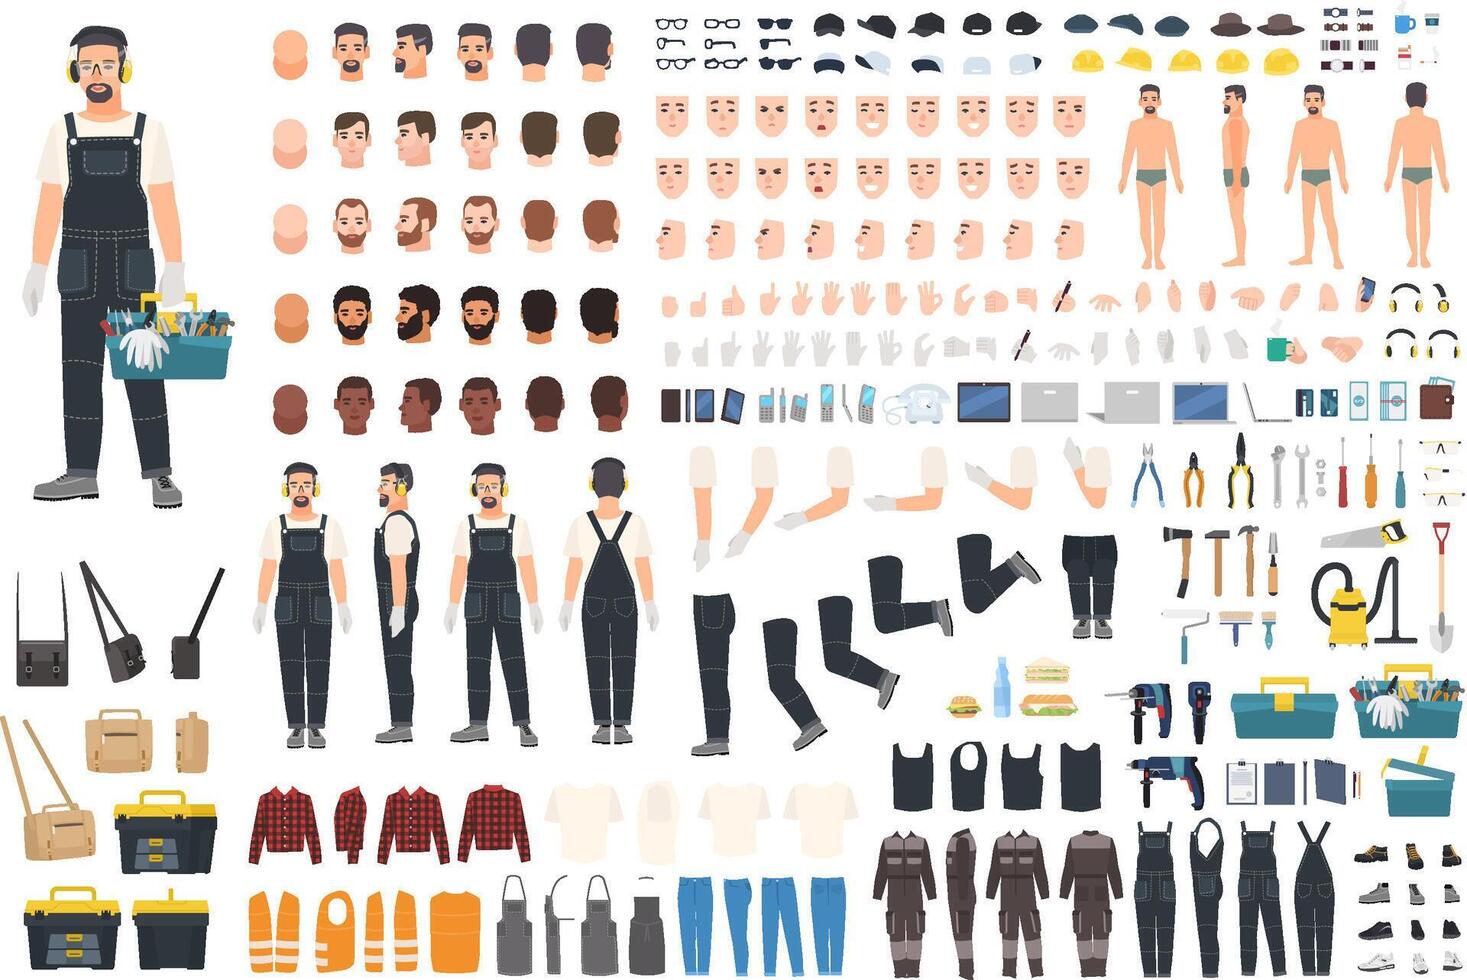 Technical worker creation kit. Set of flat male cartoon character body parts, skin types, facial gestures, clothing, working tools and accessories isolated on white background. Vector illustration.